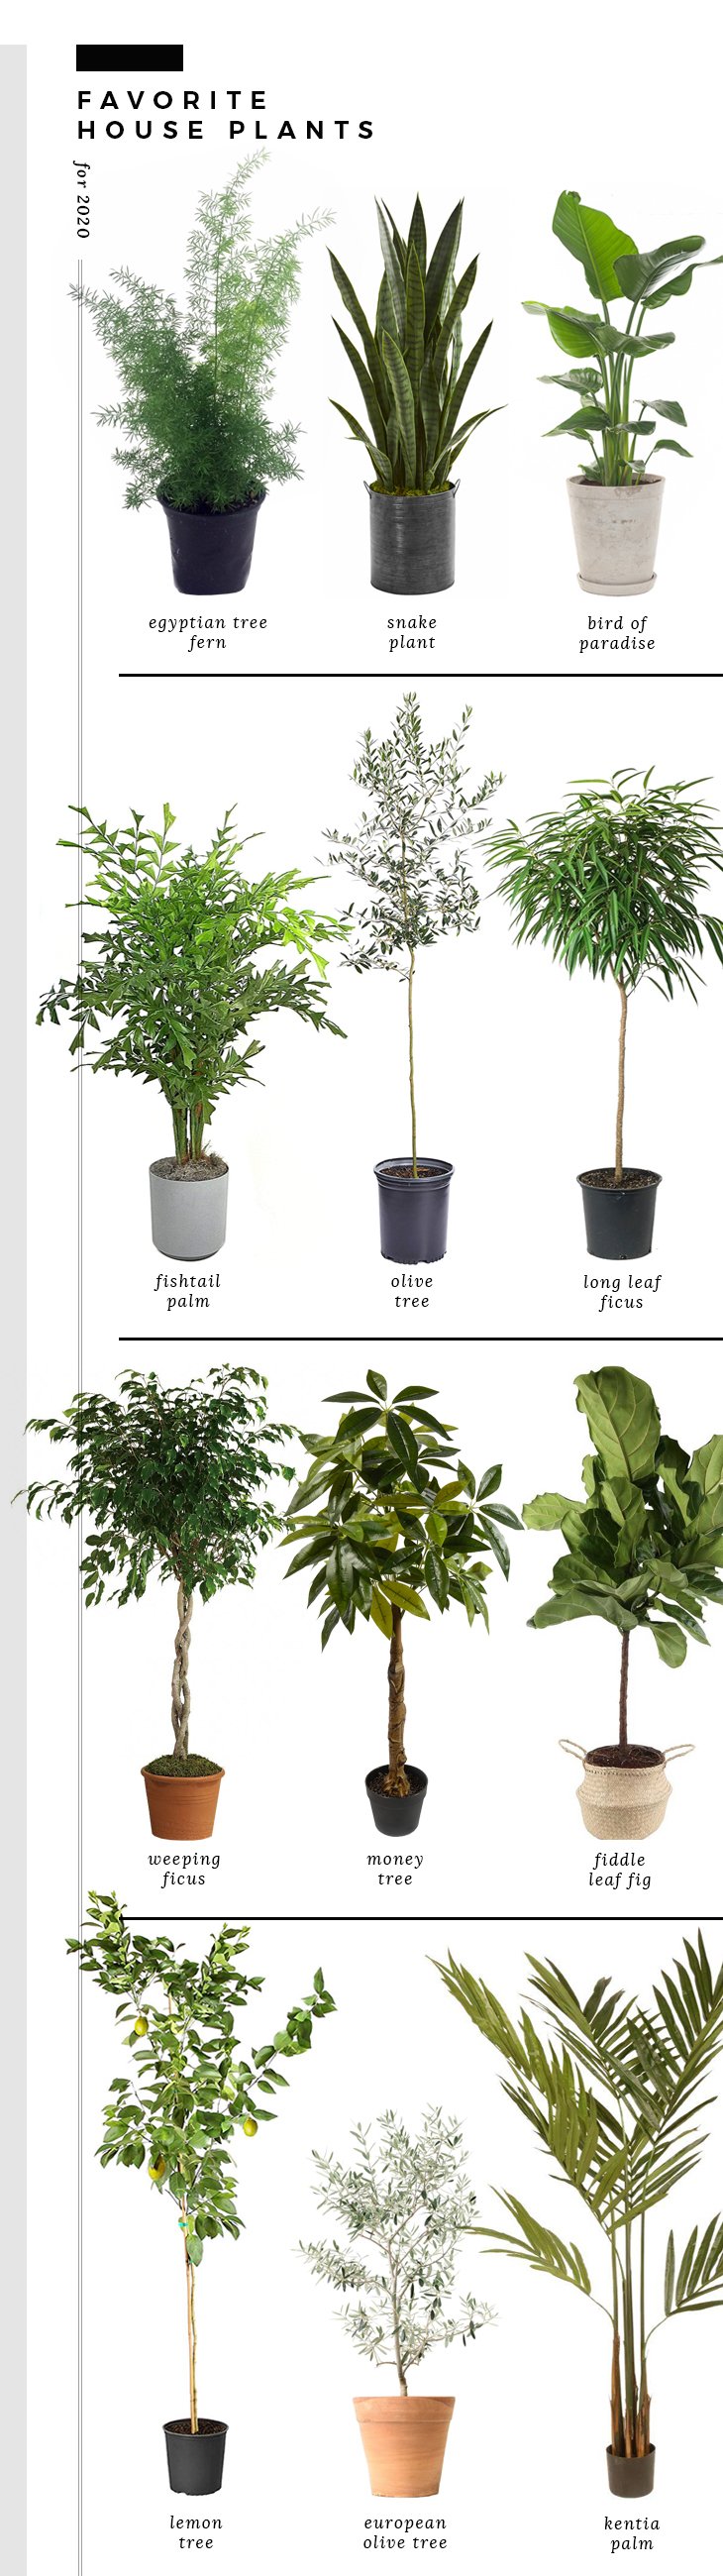 Favorite House Plants for 2020 - roomfortuesday.com